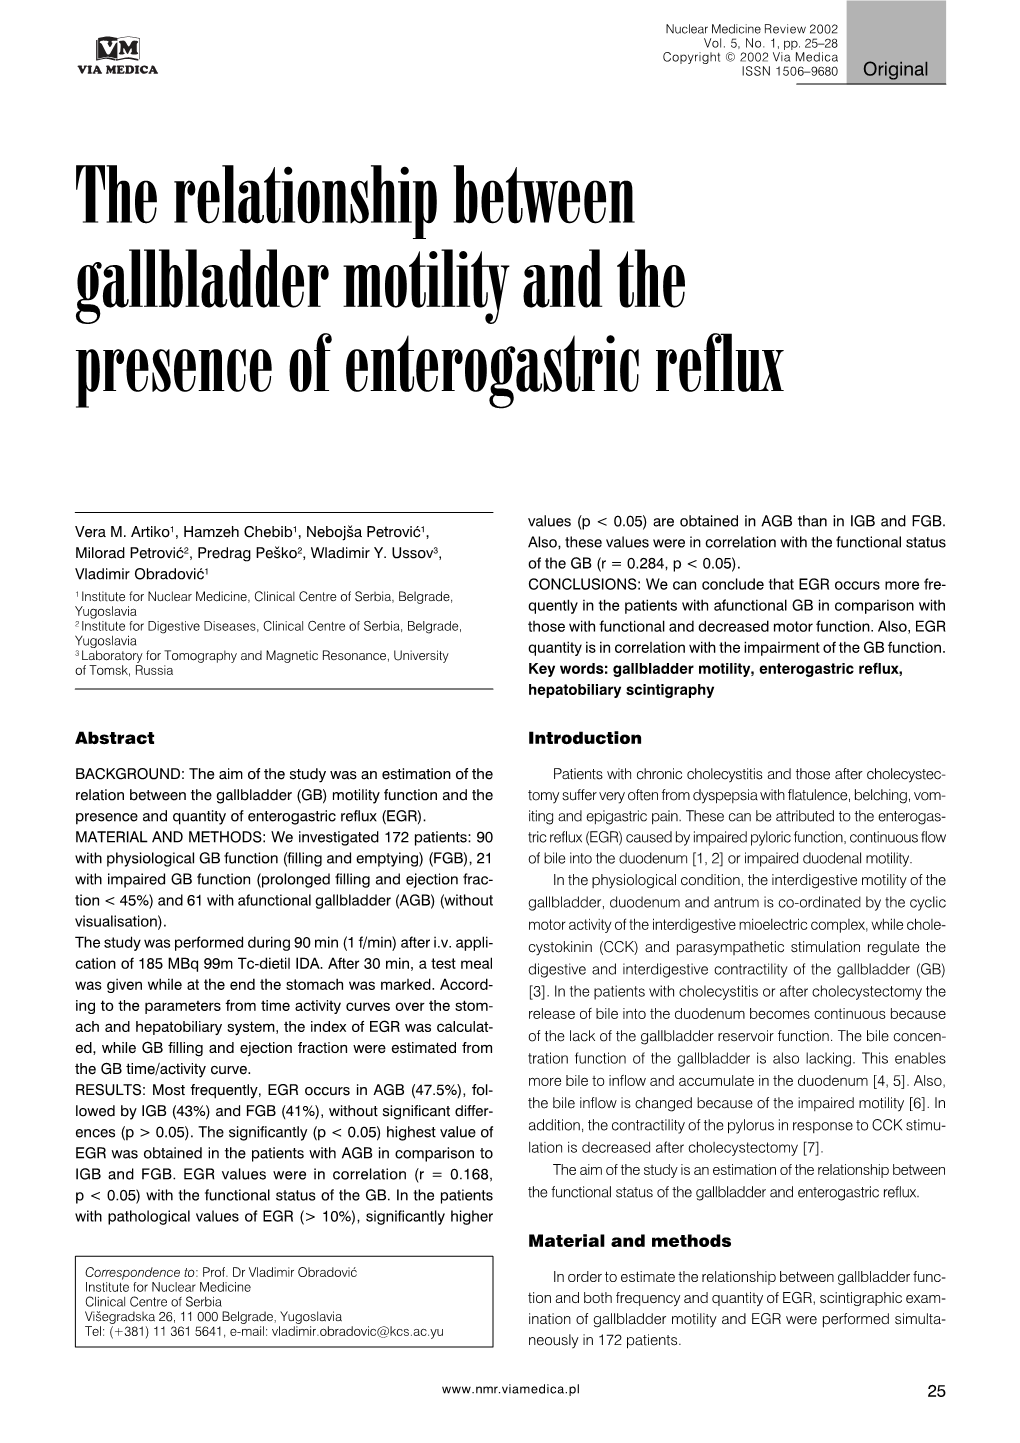 The Relationship Between Gallbladder Motility and the Presence of Enterogastric Reflux